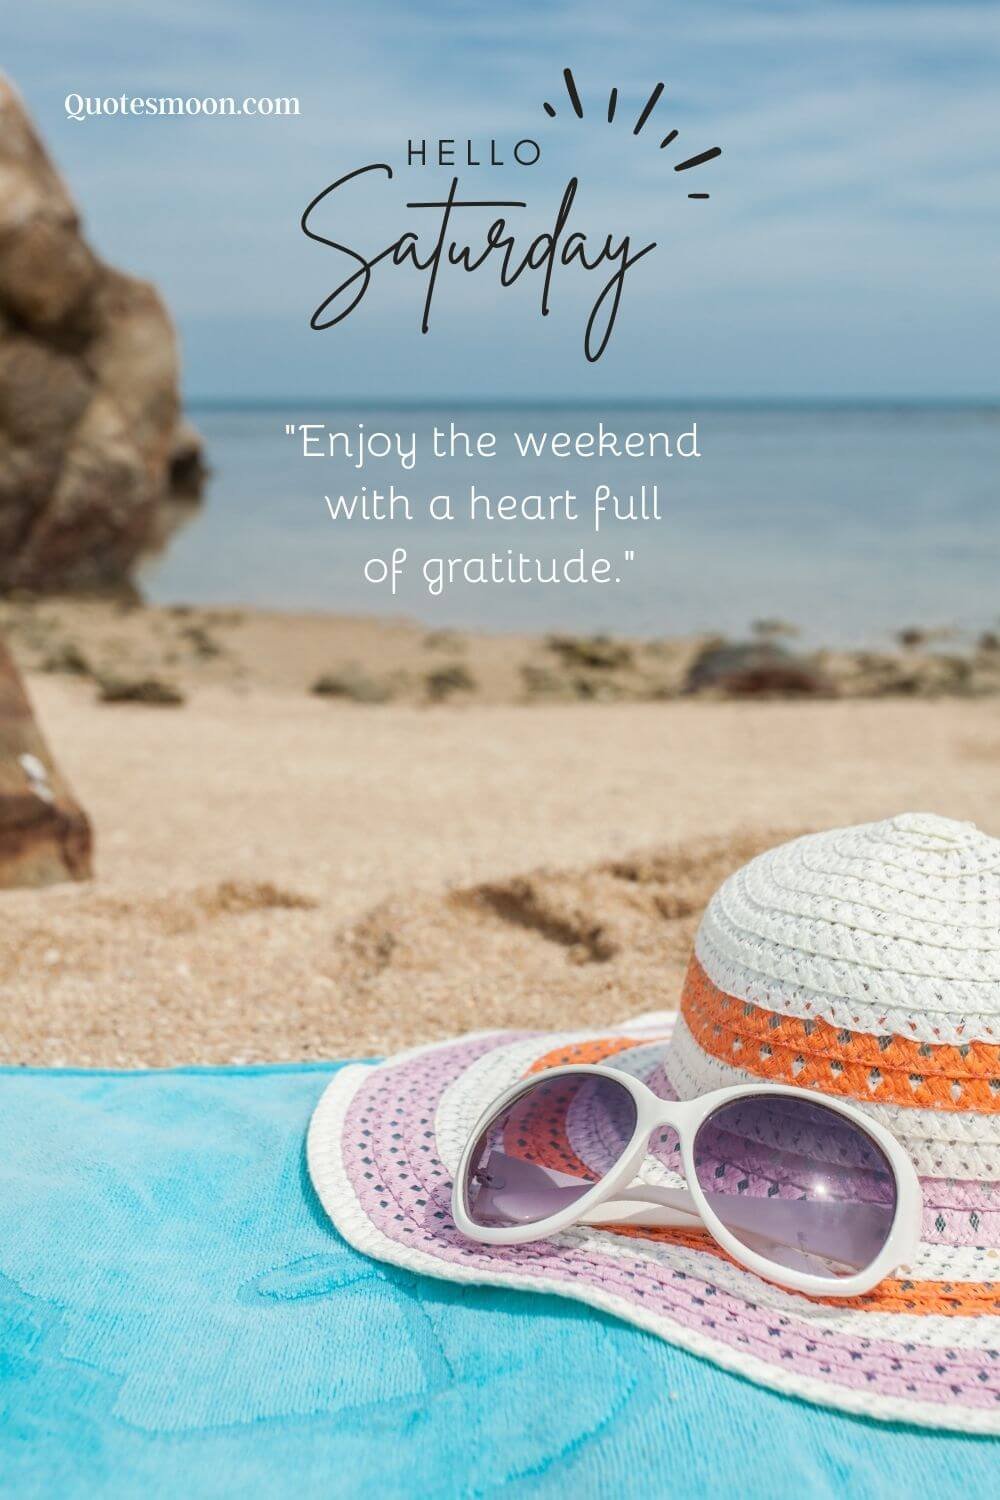 weekend holiday wishes with images